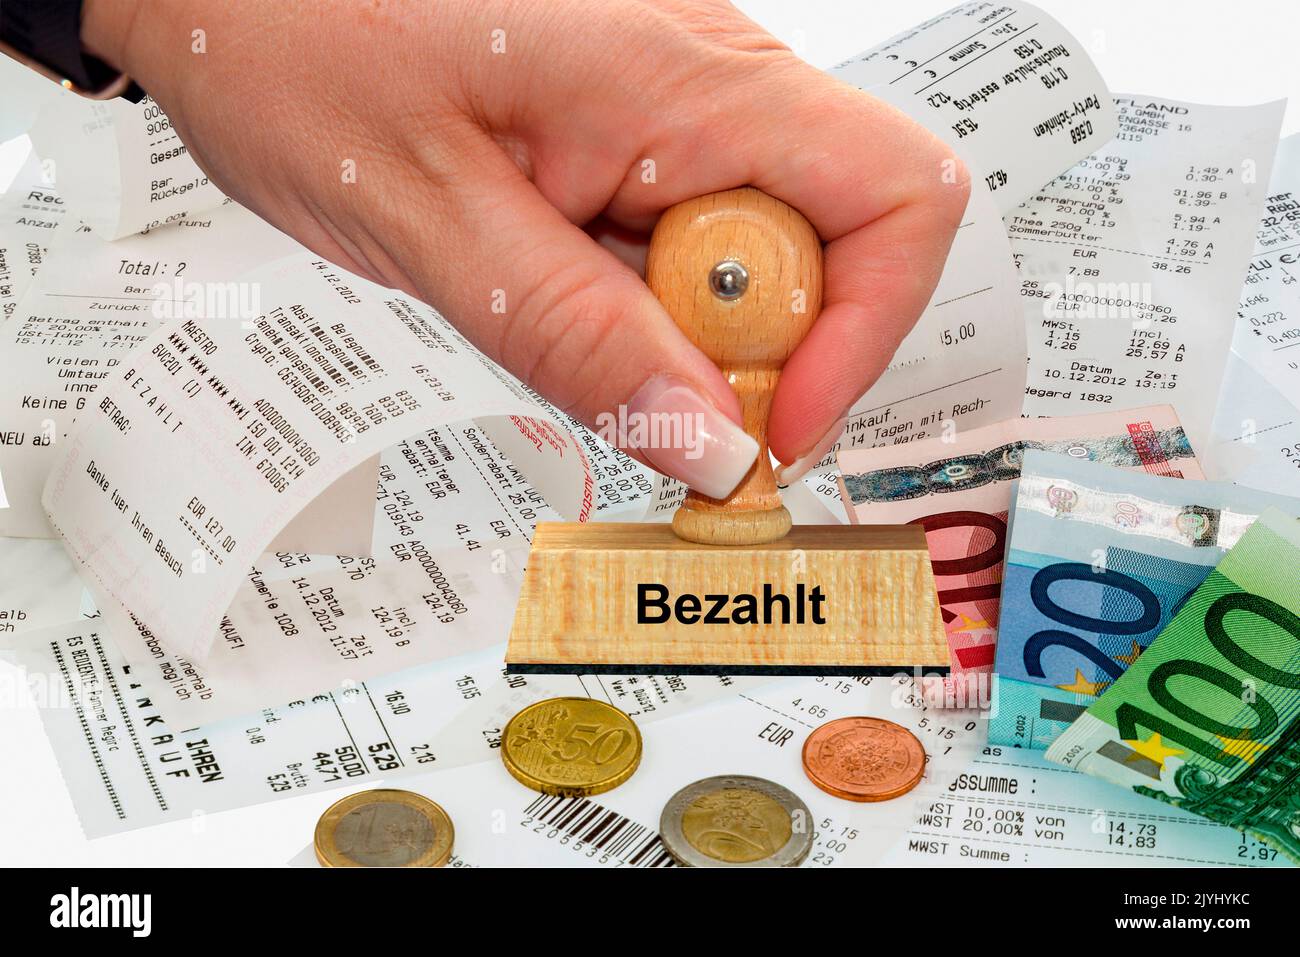 woman's hand with stamp lettering Bezahlt, paid, Germany Stock Photo